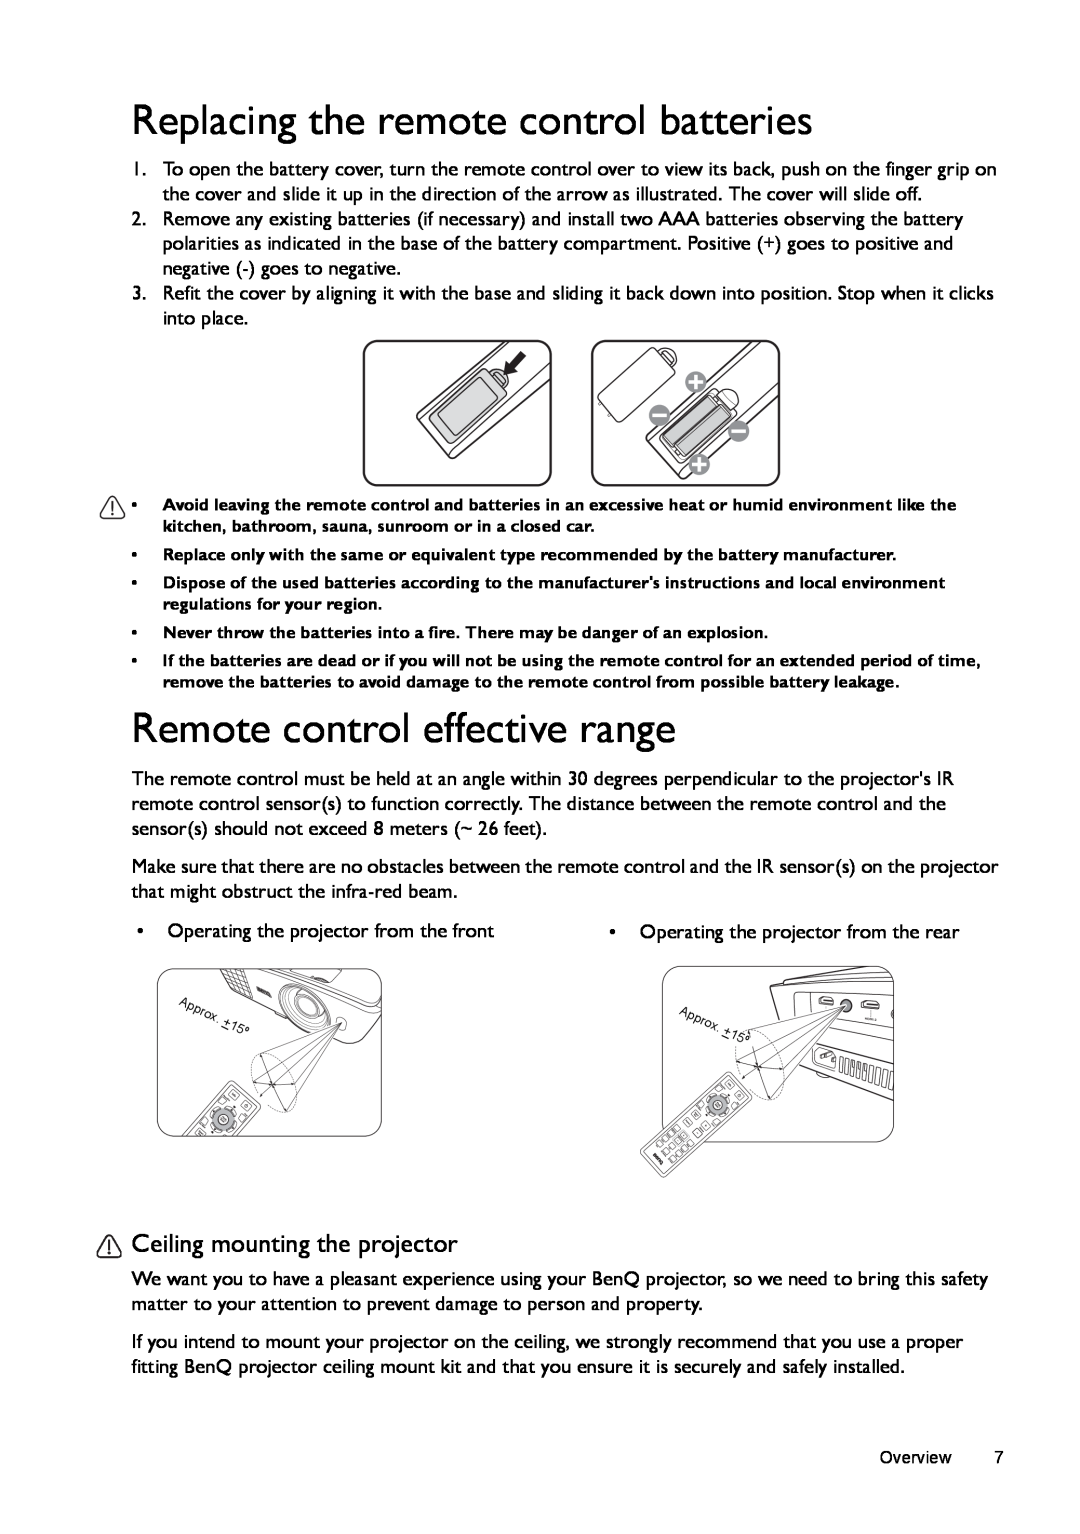 BenQ W770ST Replacing the remote control batteries, Remote control effective range, Ceiling mounting the projector 